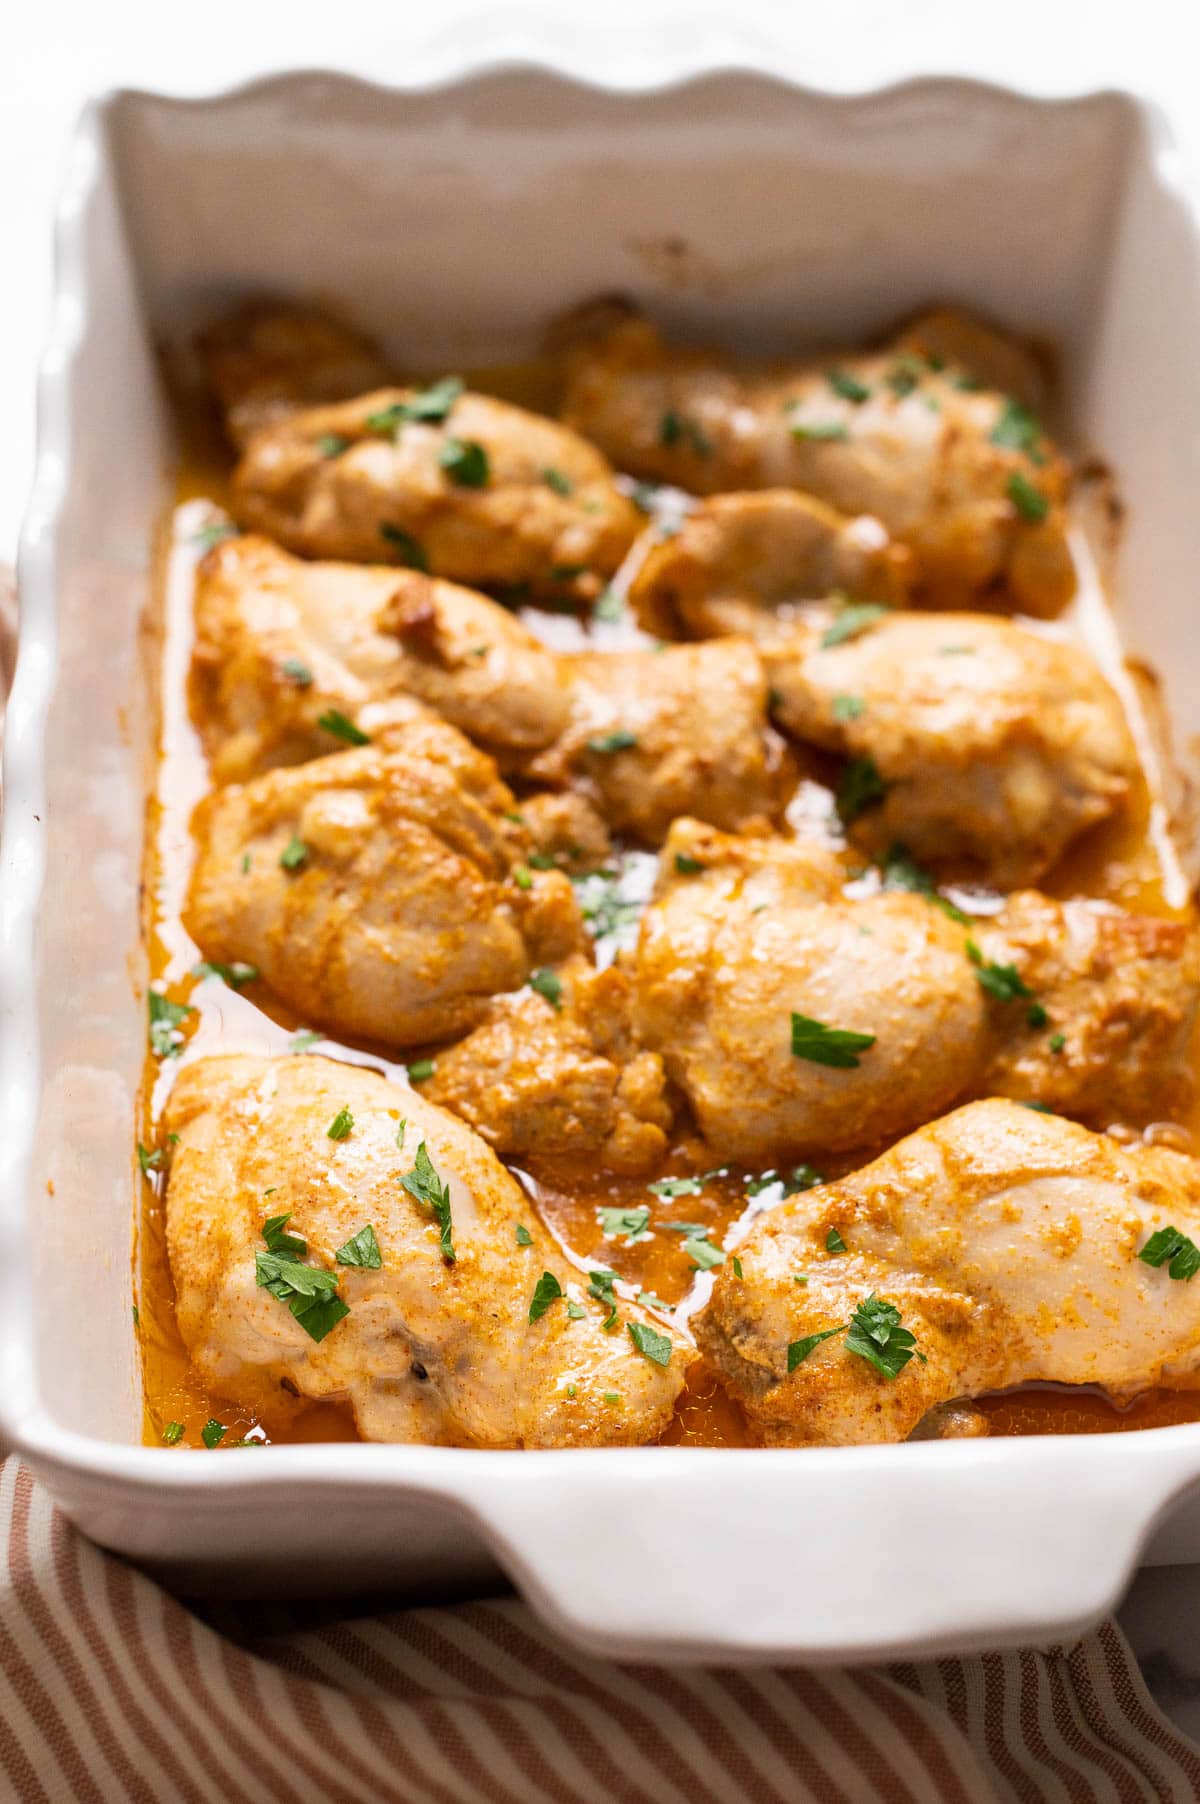 Side view of baked skinless chicken thighs with cooking juices in a baking dish.